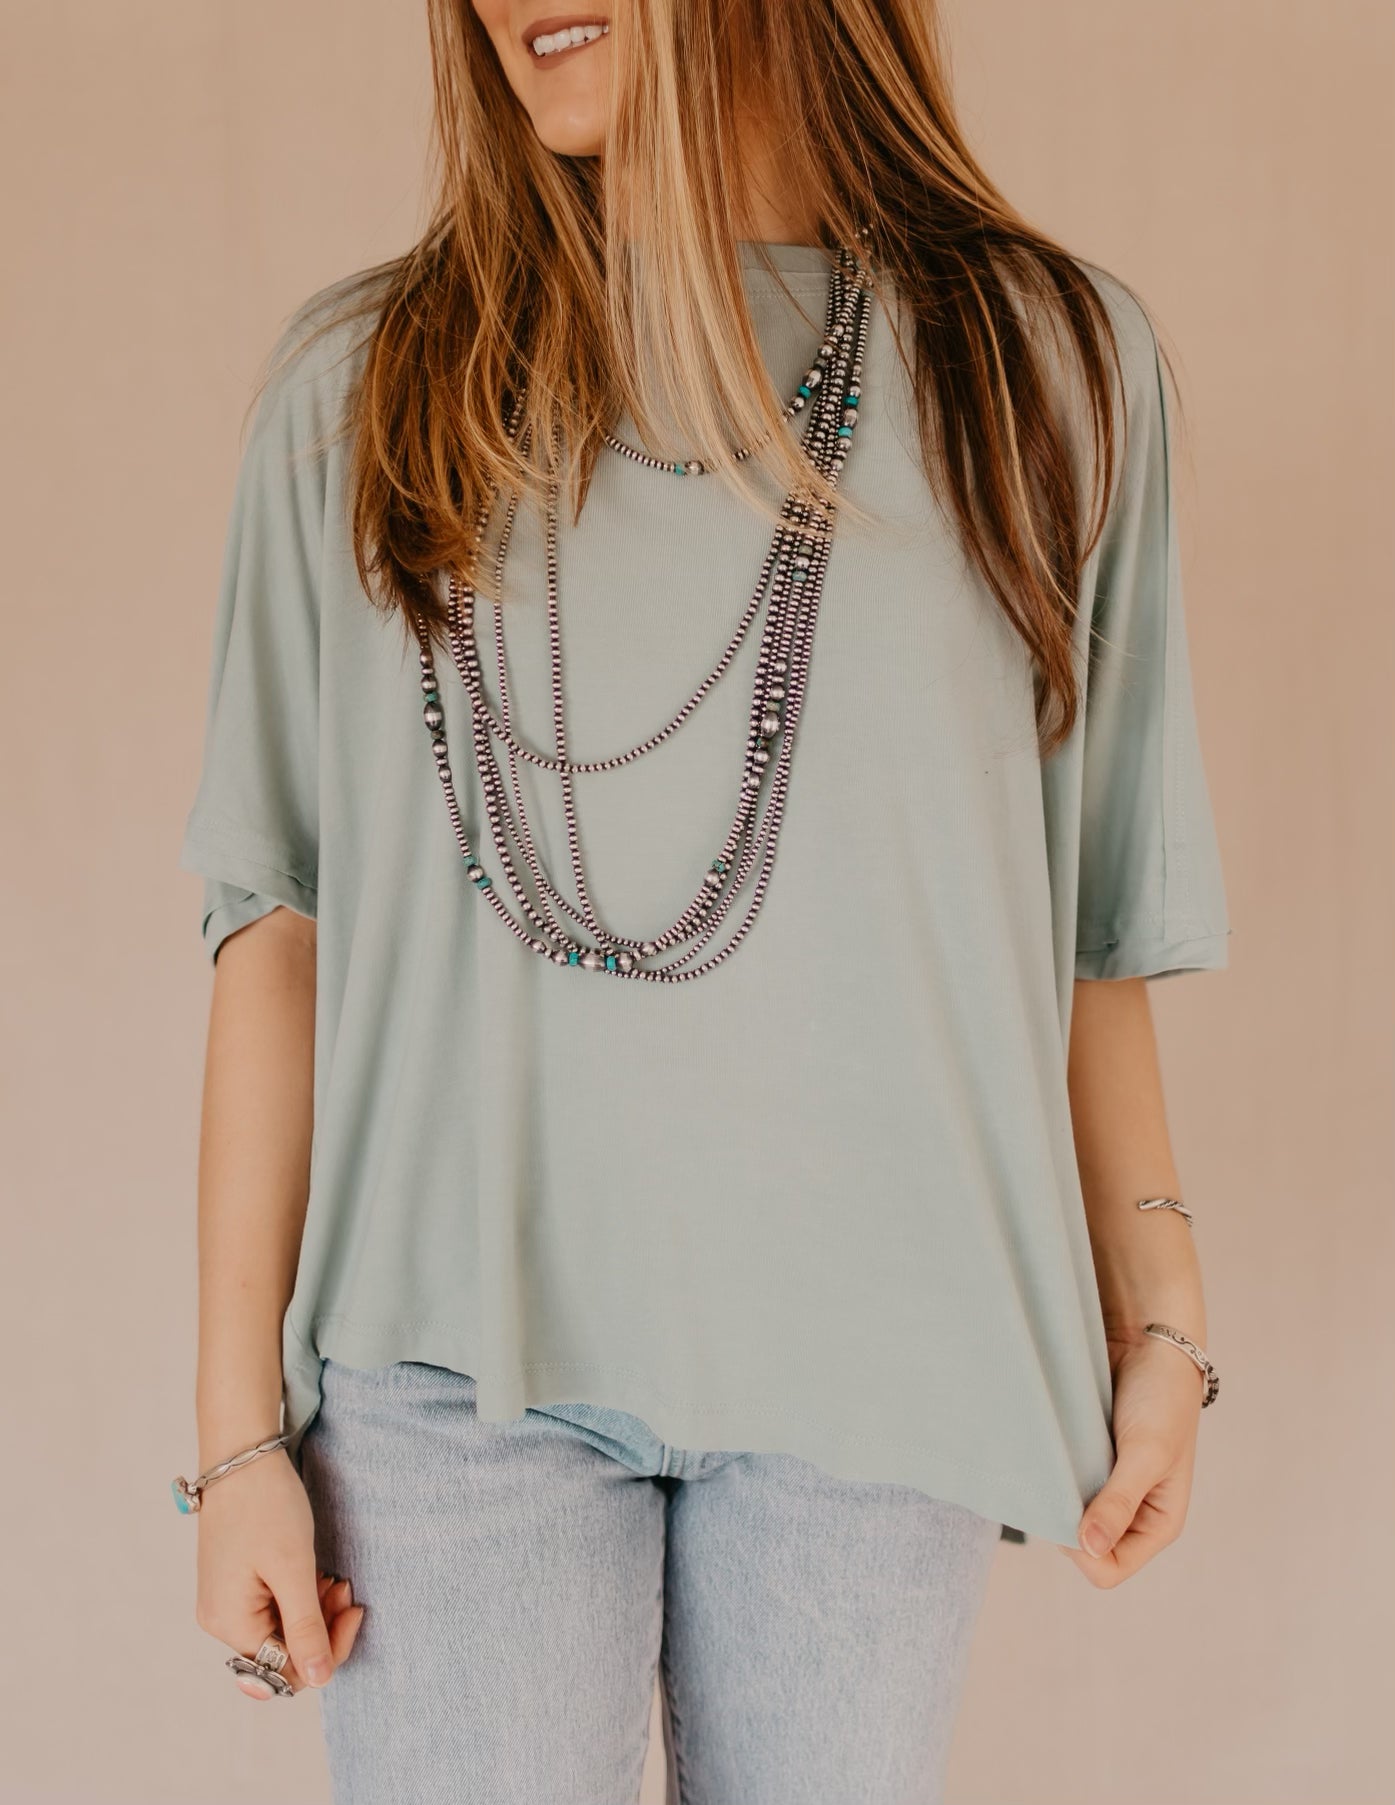 The Langley Top {multiple colors}